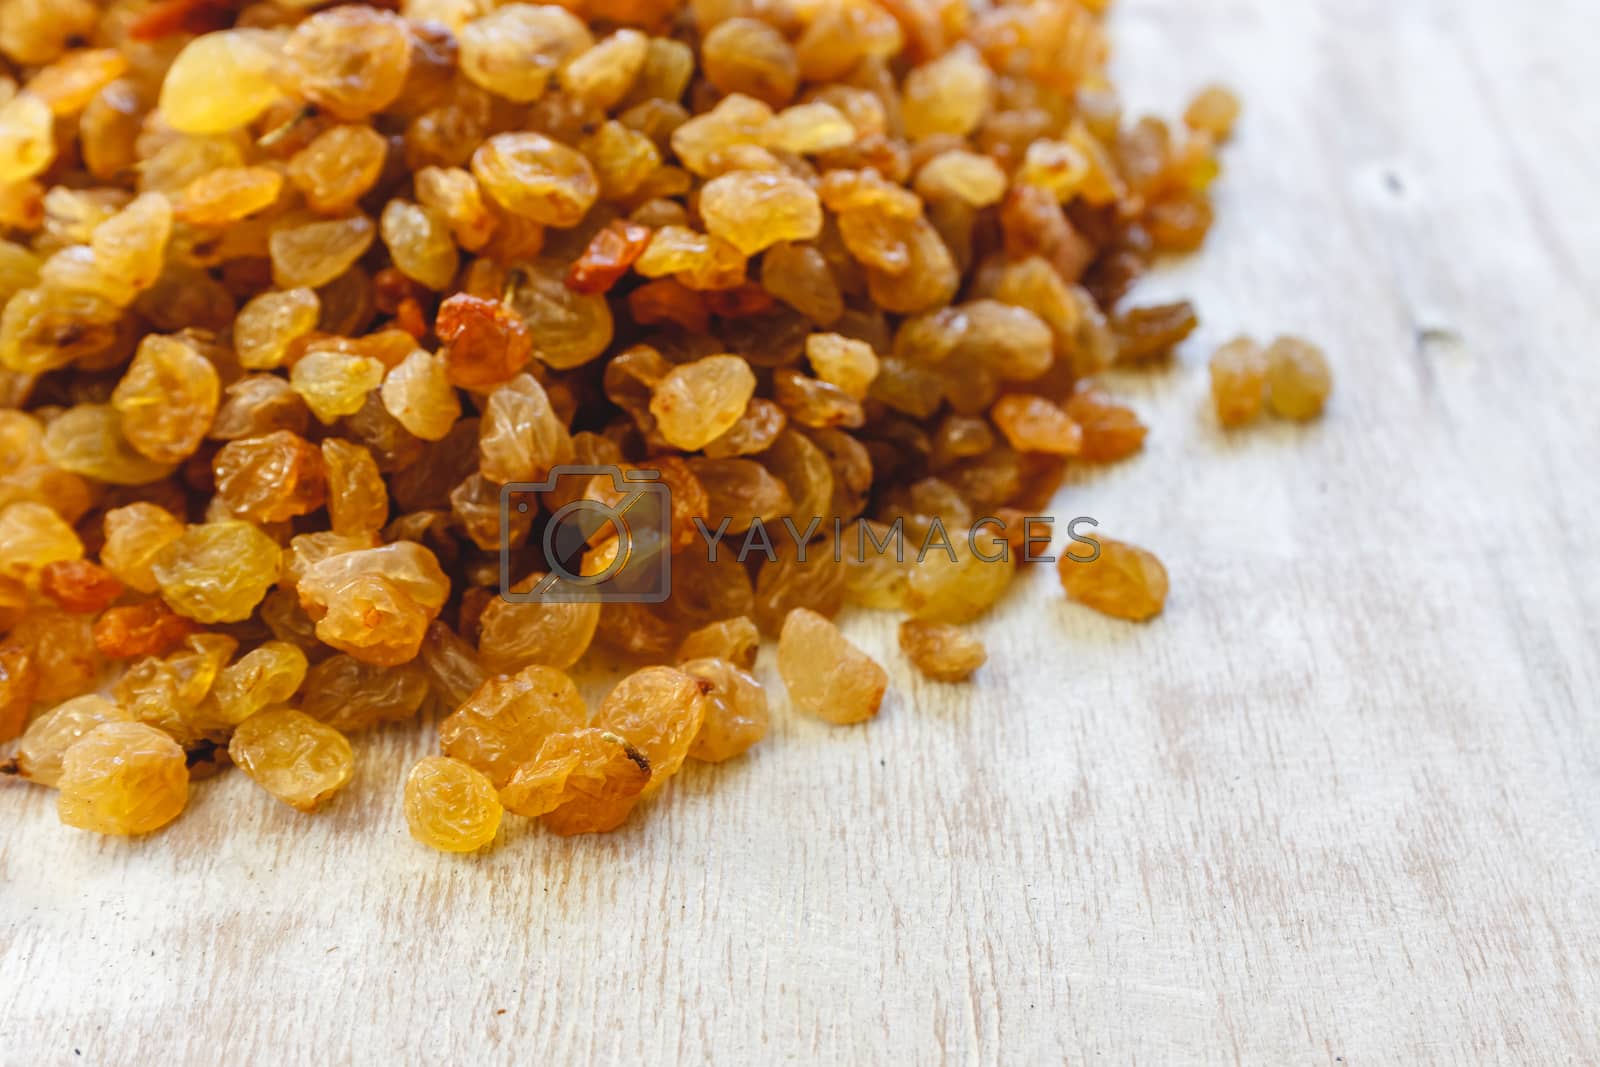 Royalty free image of Background from light yellow raisins. Close-up. by Tanacha